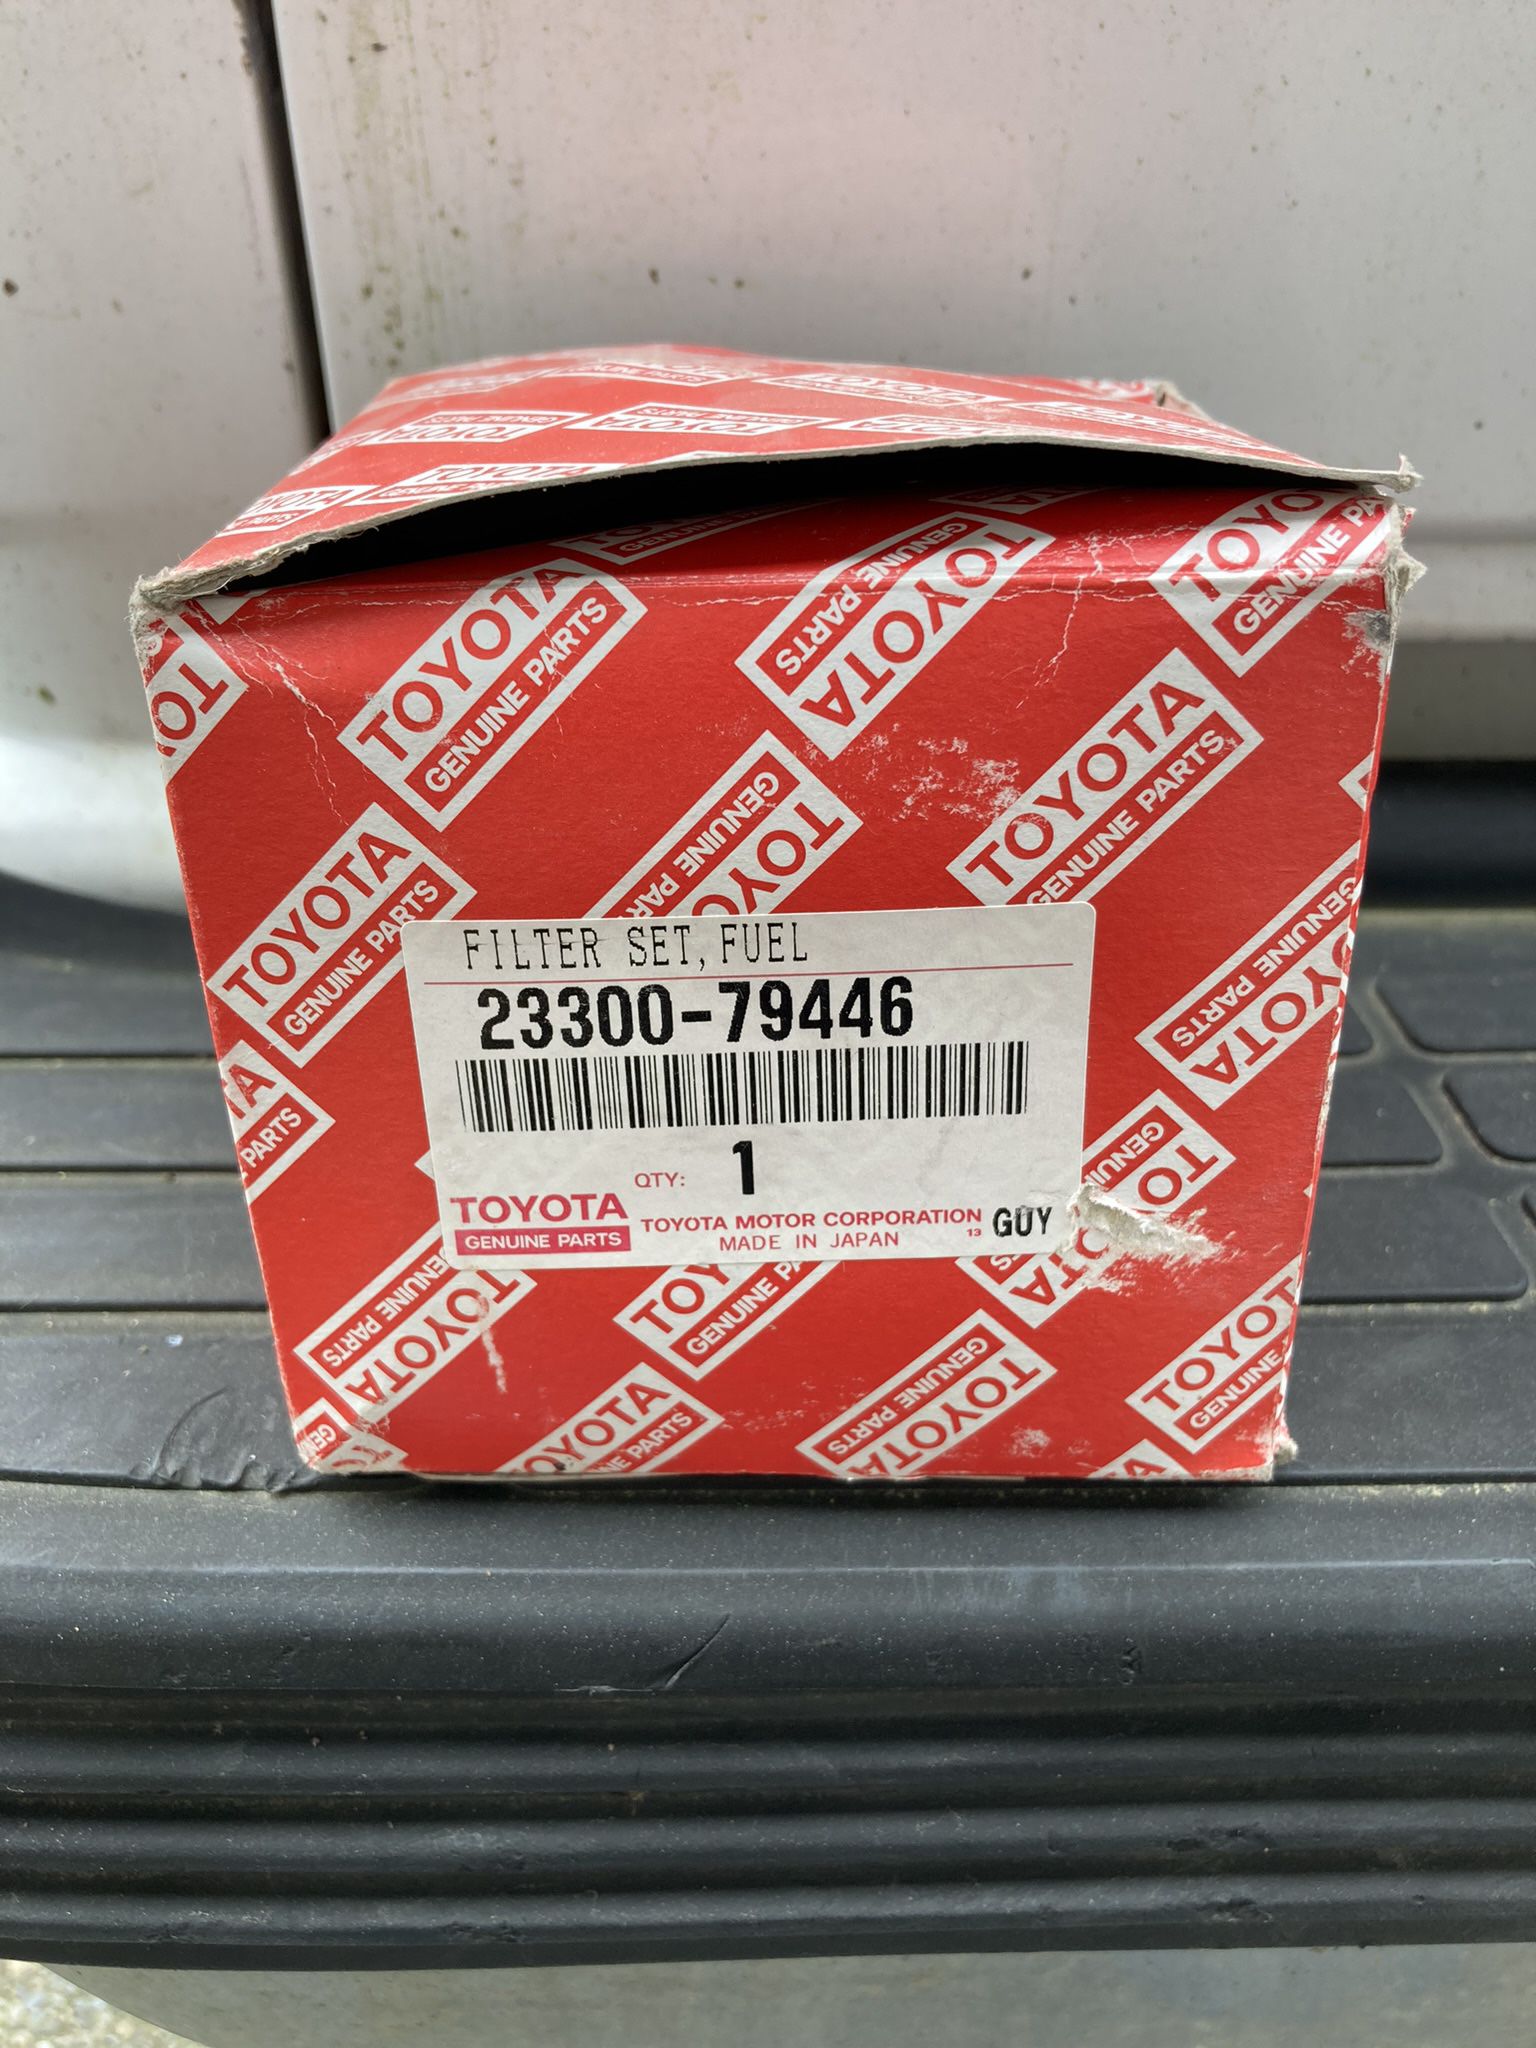 PENDING New Toyota Fuel Filter